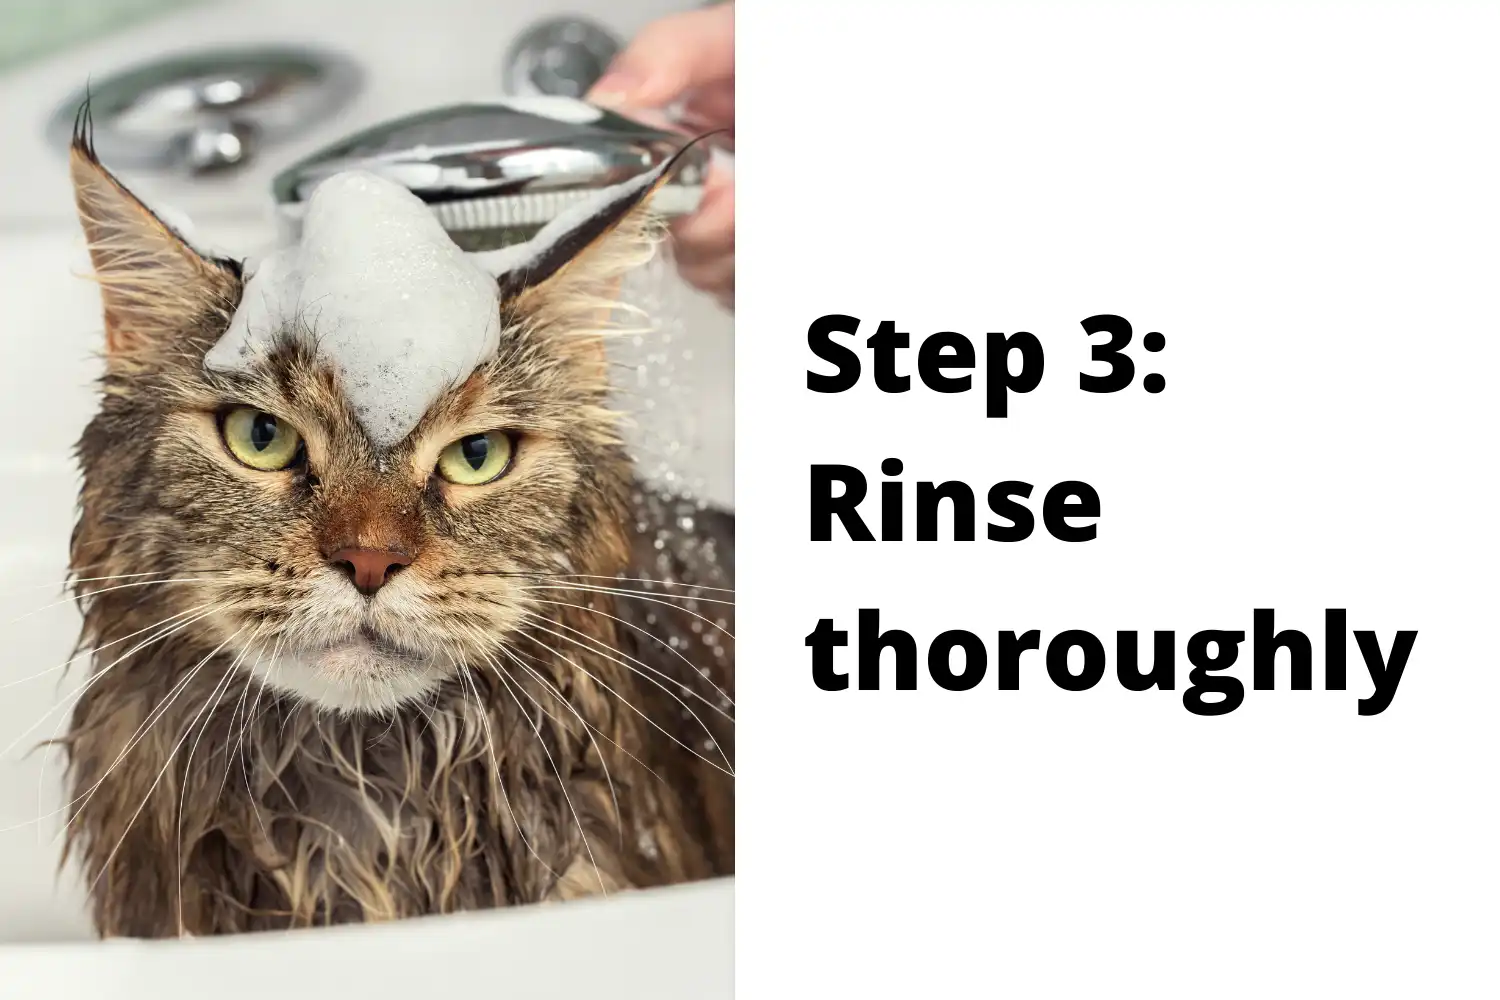 How to Bathe A Cat? - Step 3: Rinse thoroughly